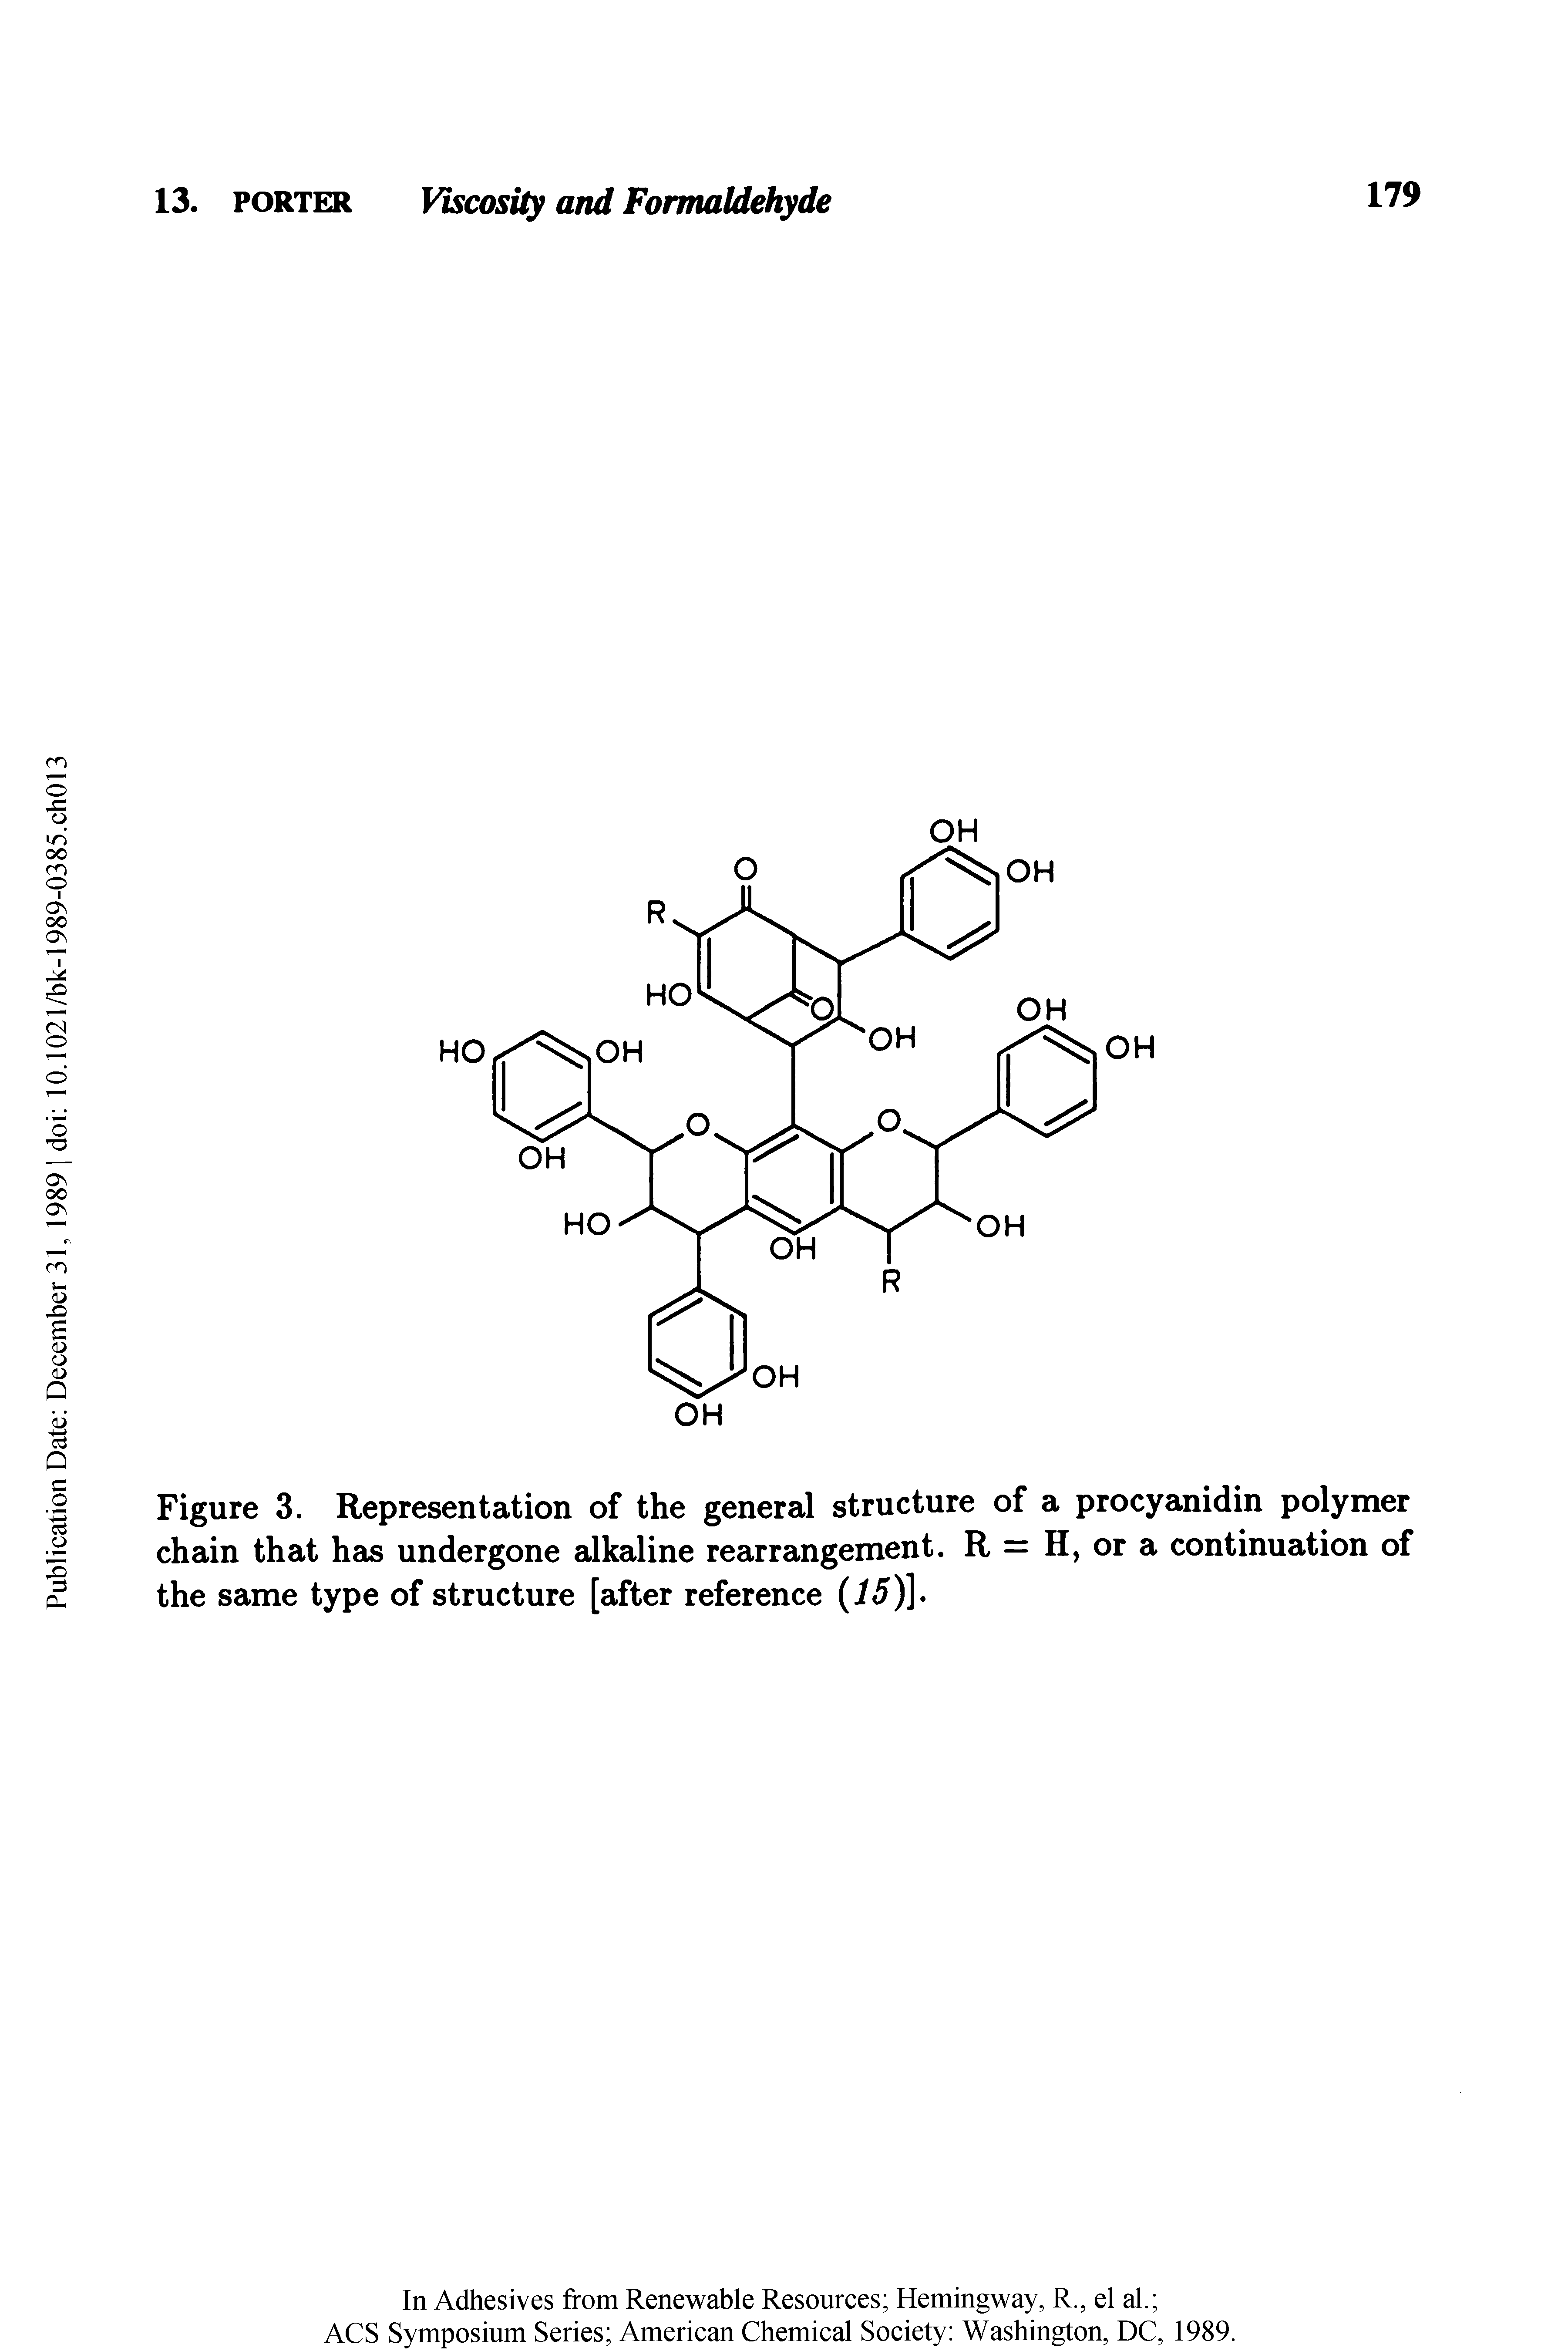 Figure 3. Representation of the general structure of a procyanidin polymer chain that has undergone alkaline rearrangement. R = H, or a continuation of the same type of structure [after reference (15)] ...